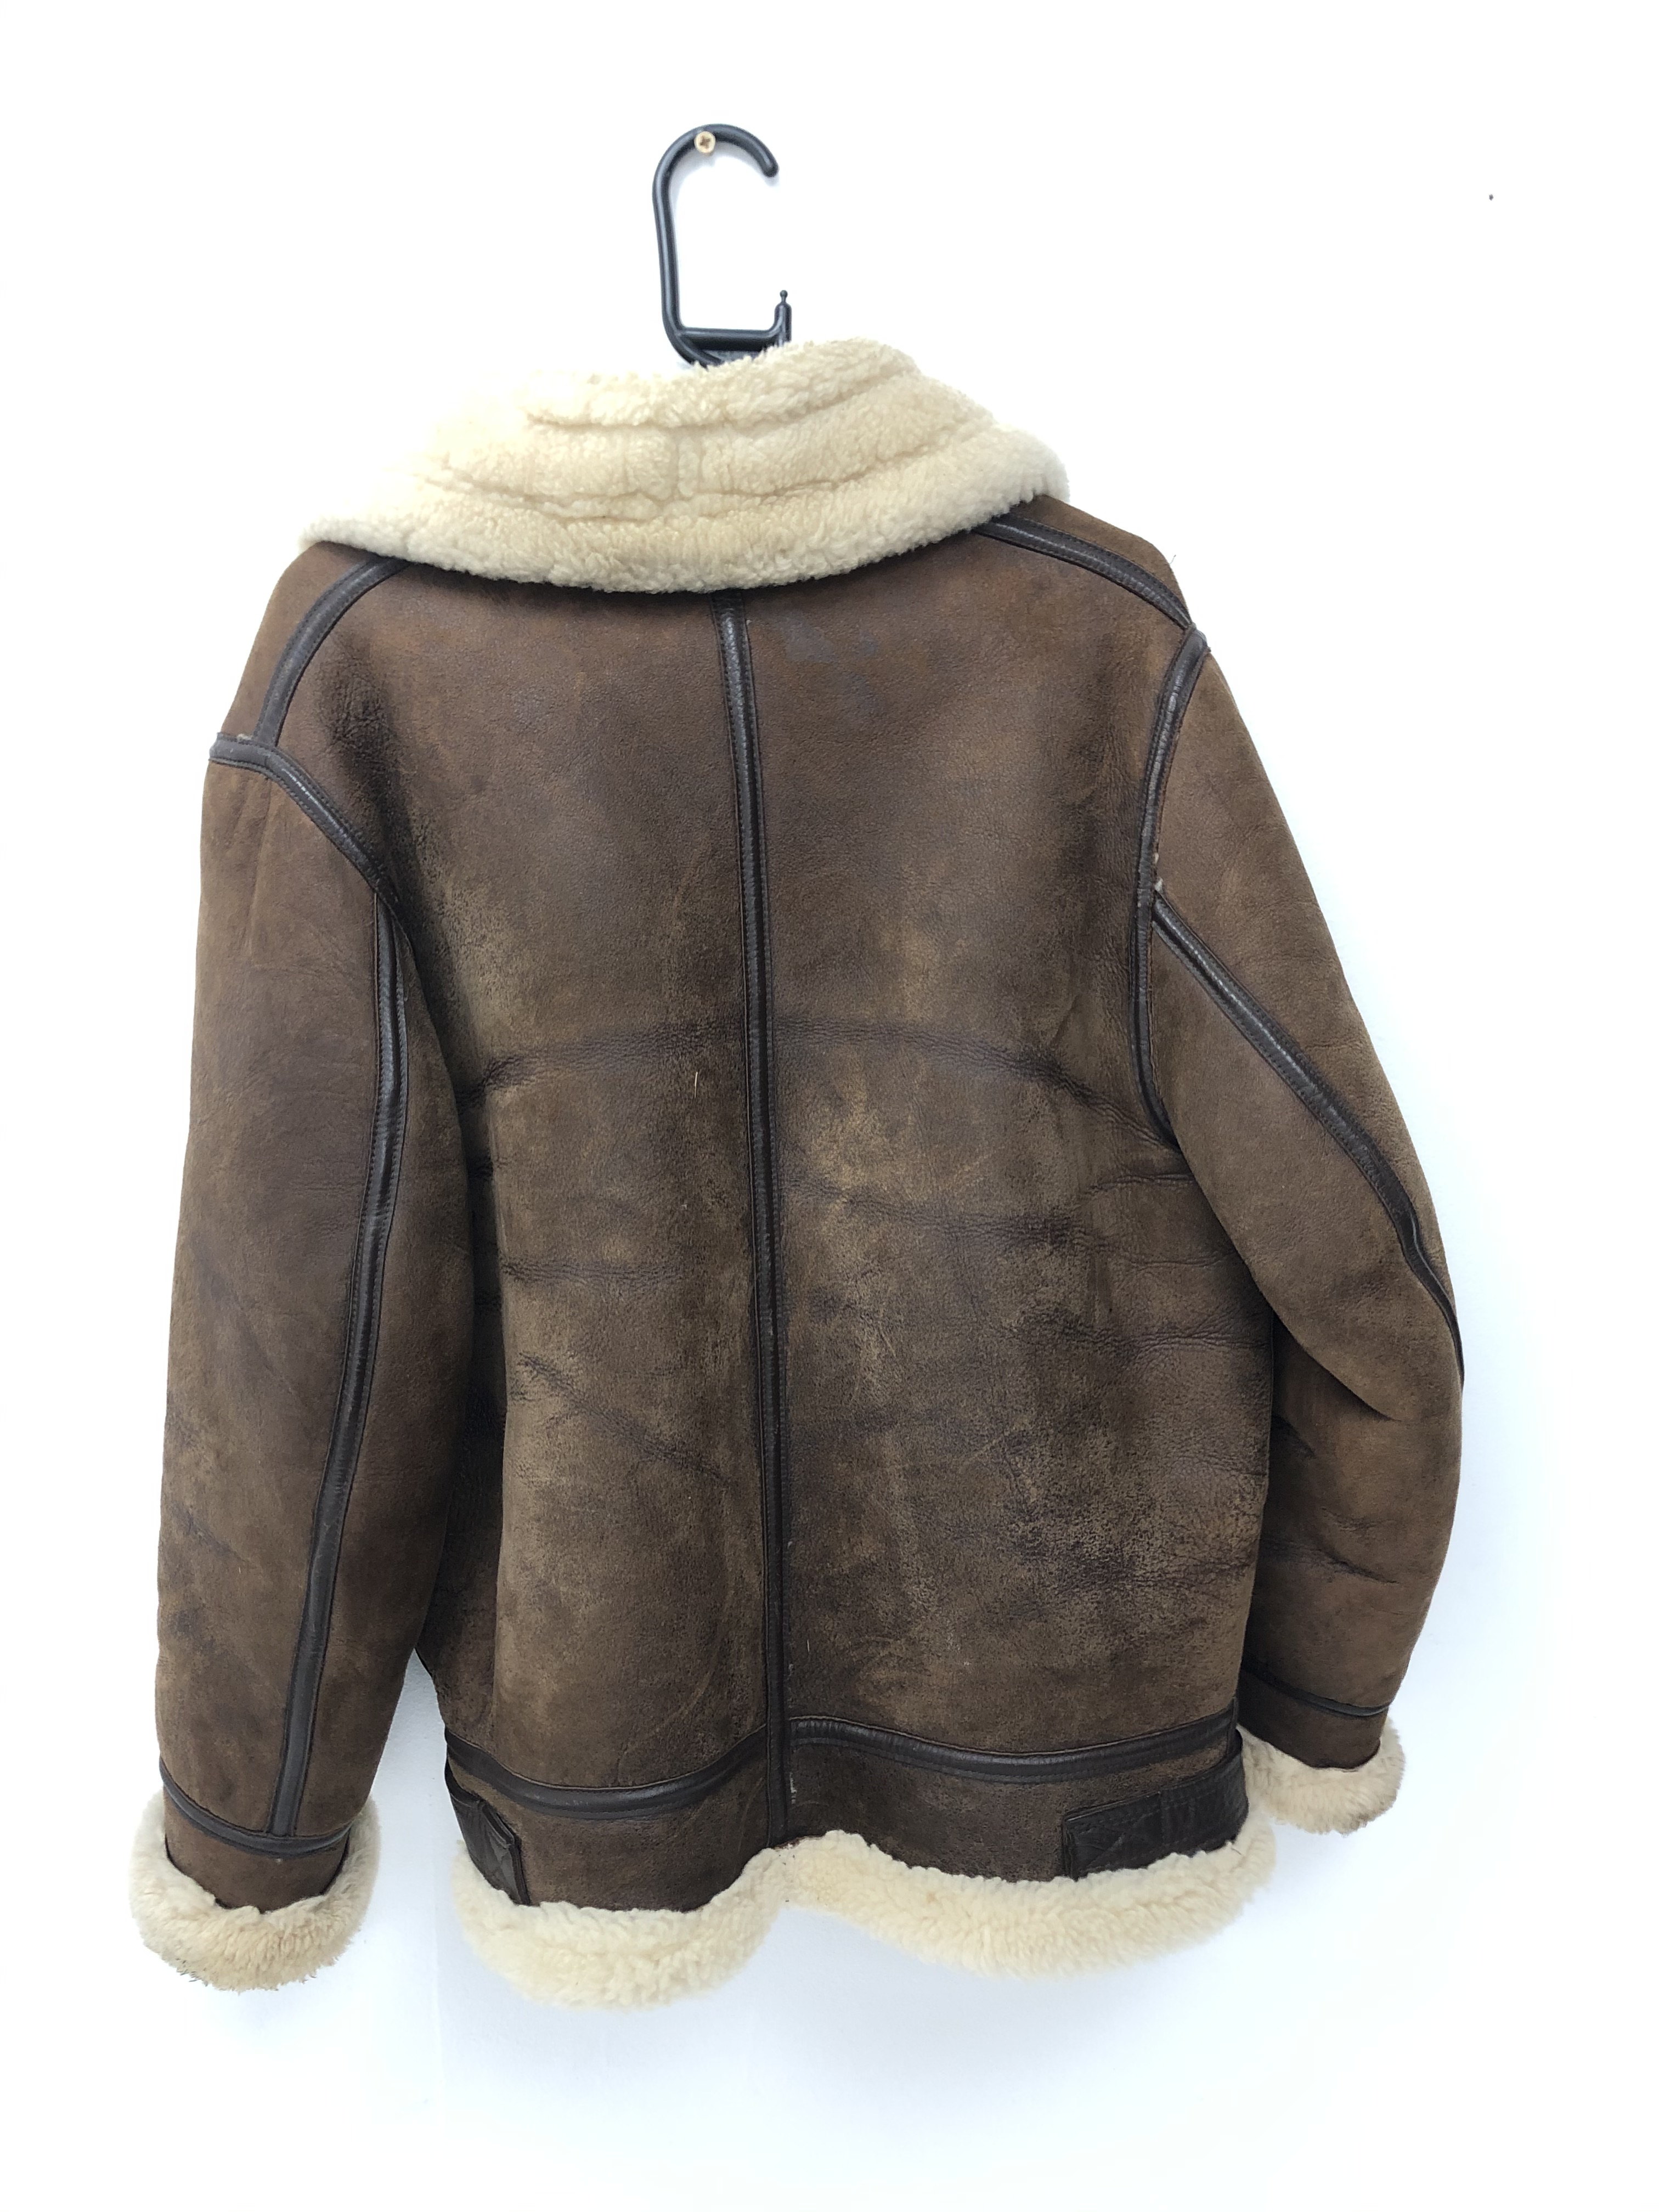 US Air Force style brown leather sheepskin lined flying type jacket, - Image 2 of 2